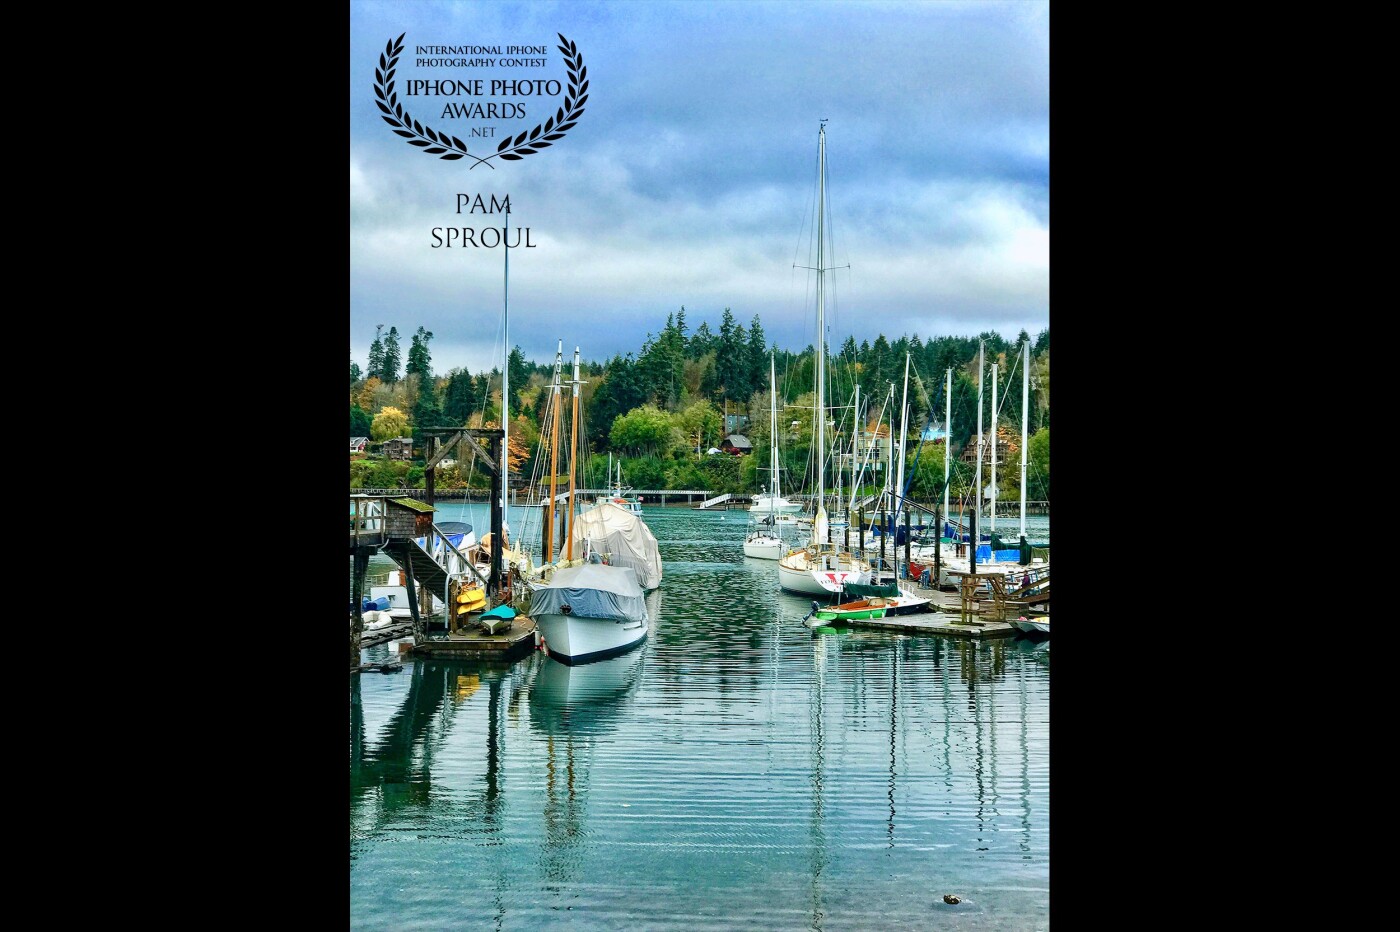 An afternoon walk on the island-processing life-the light became softer & richer.....grateful for the opportunity to capture this in my mind and in my iPhone <br />
“Soft light  island harbor view” 2018 -Bainbridge Island